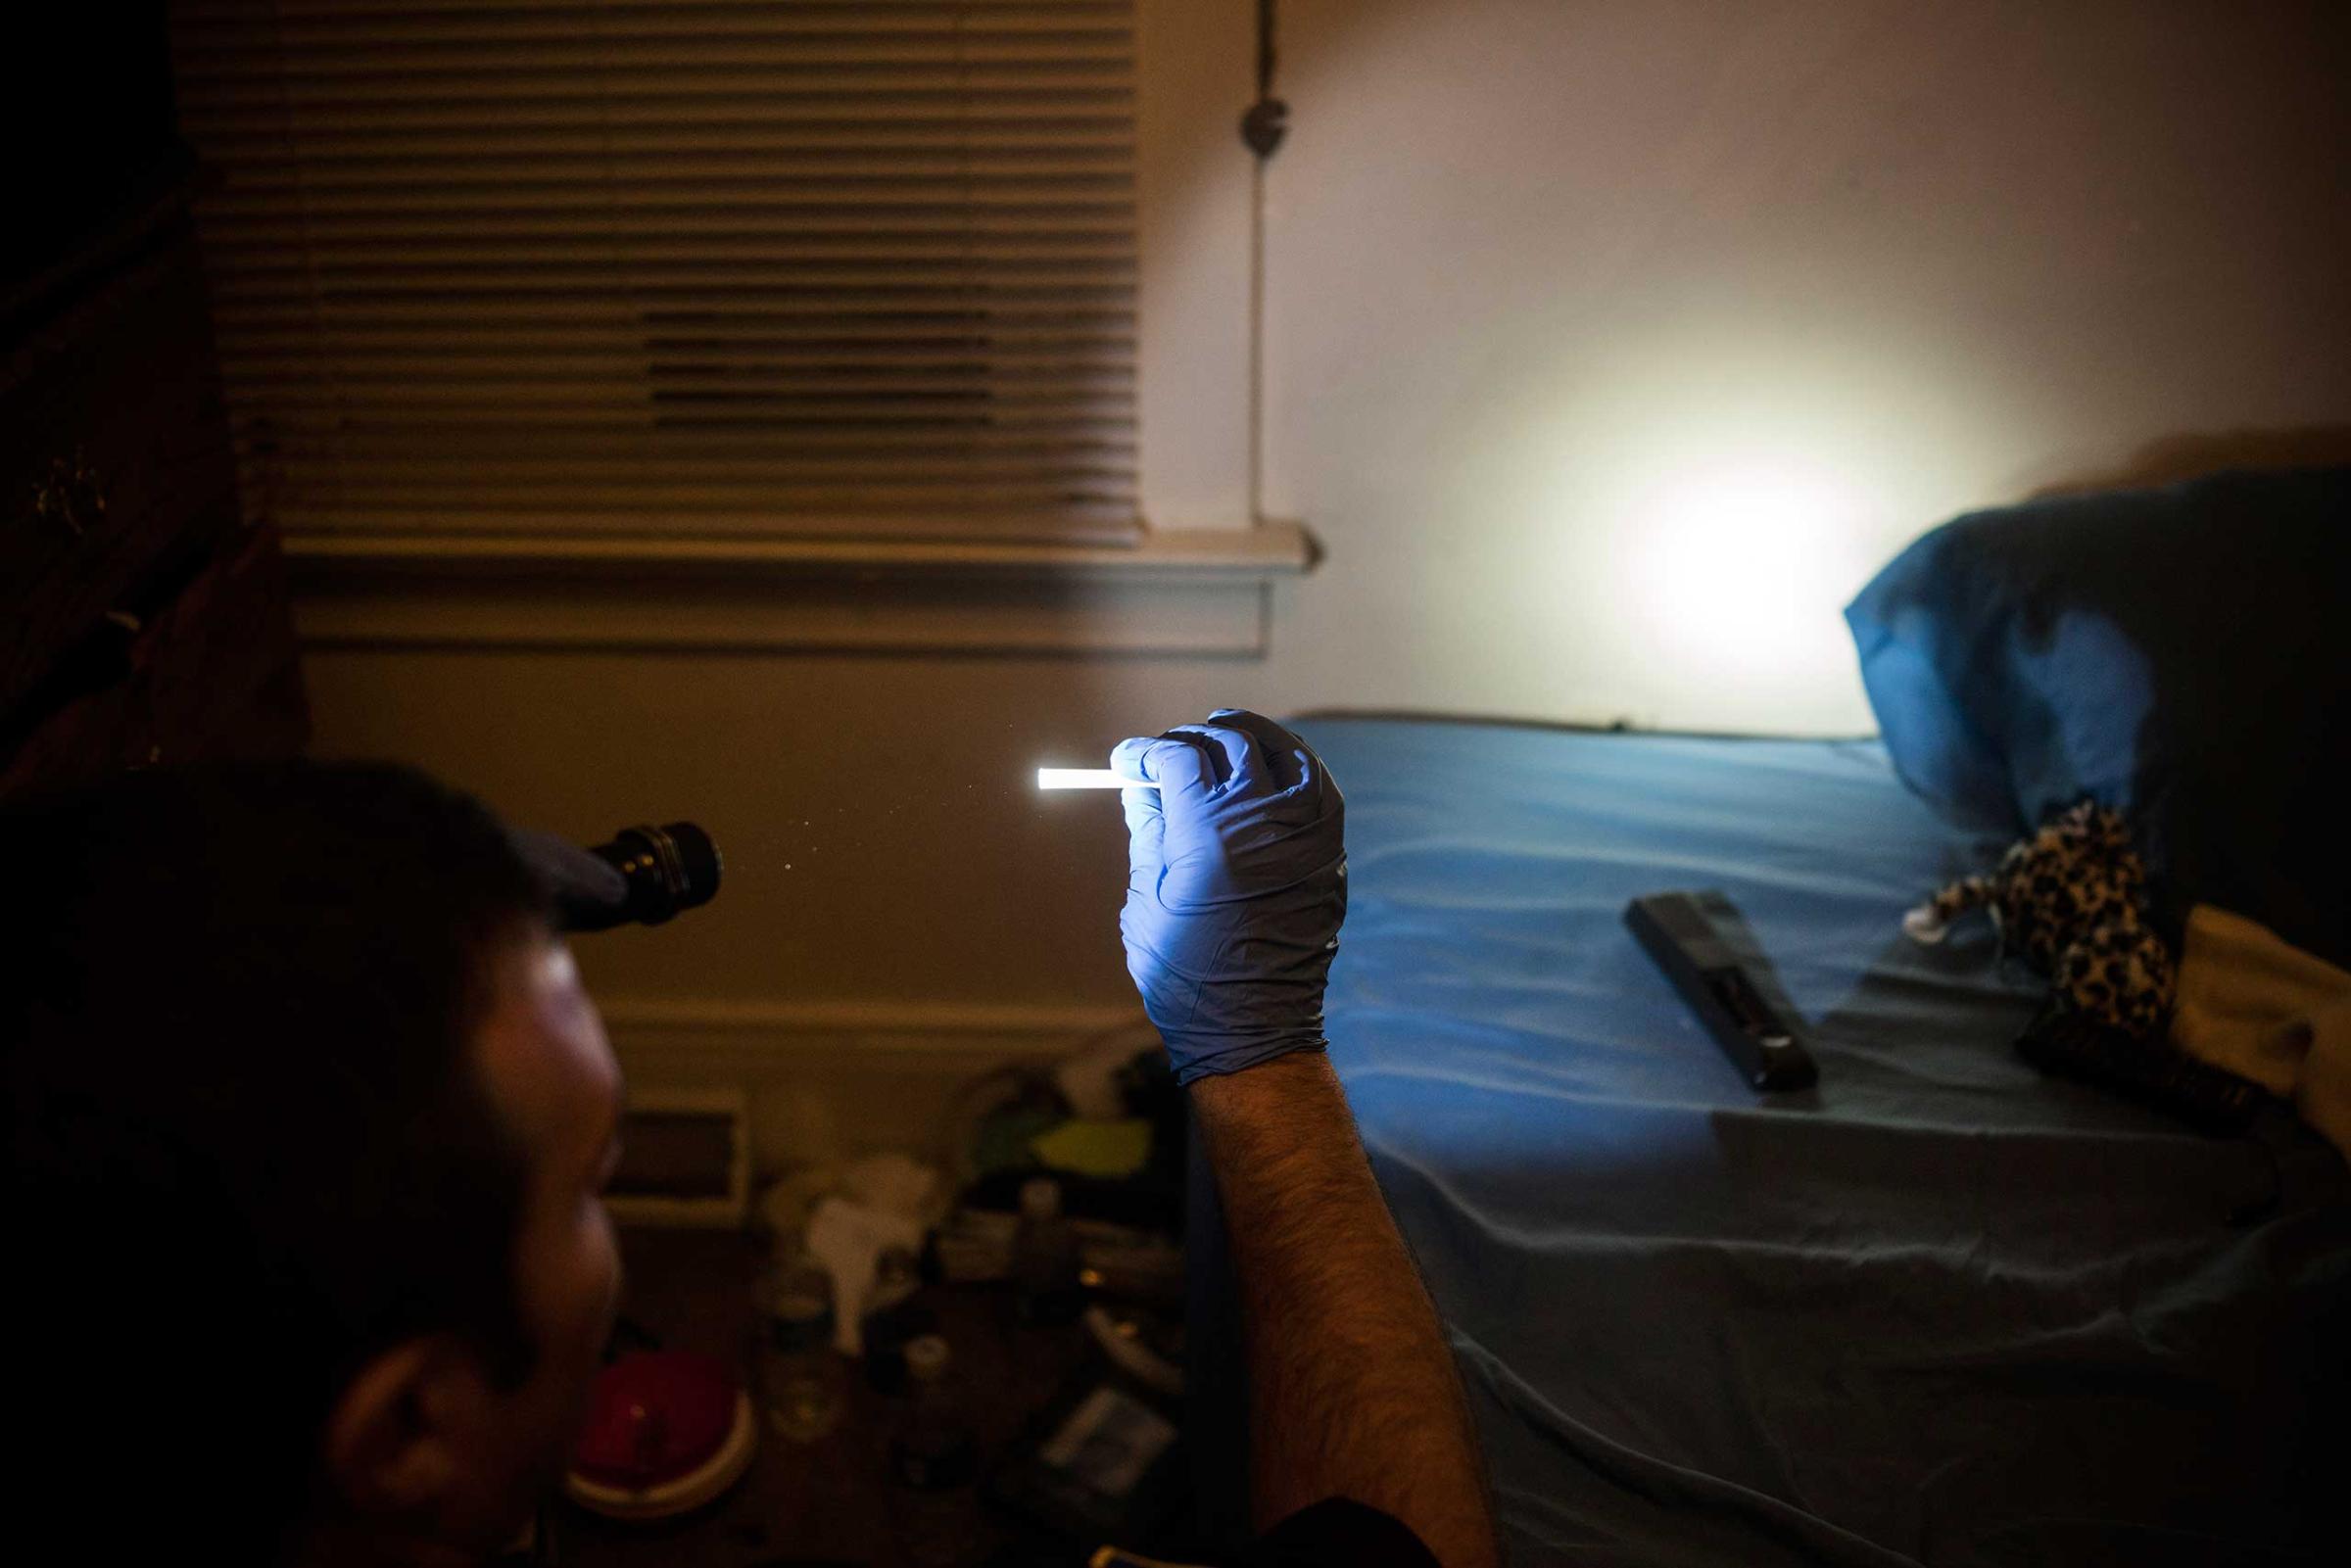 A police officer holds up drug paraphernalia after searching through a teenager’s room in East Liverpool, Ohio, on Oct. 8, 2016. The teen's mother called the police after her daughter vandalized her car and invited the officer into her home to search her daughter's room and take out whatever drugs he found. She said “Im tired of her using and I don’t know what to do about it. Just take it all.”